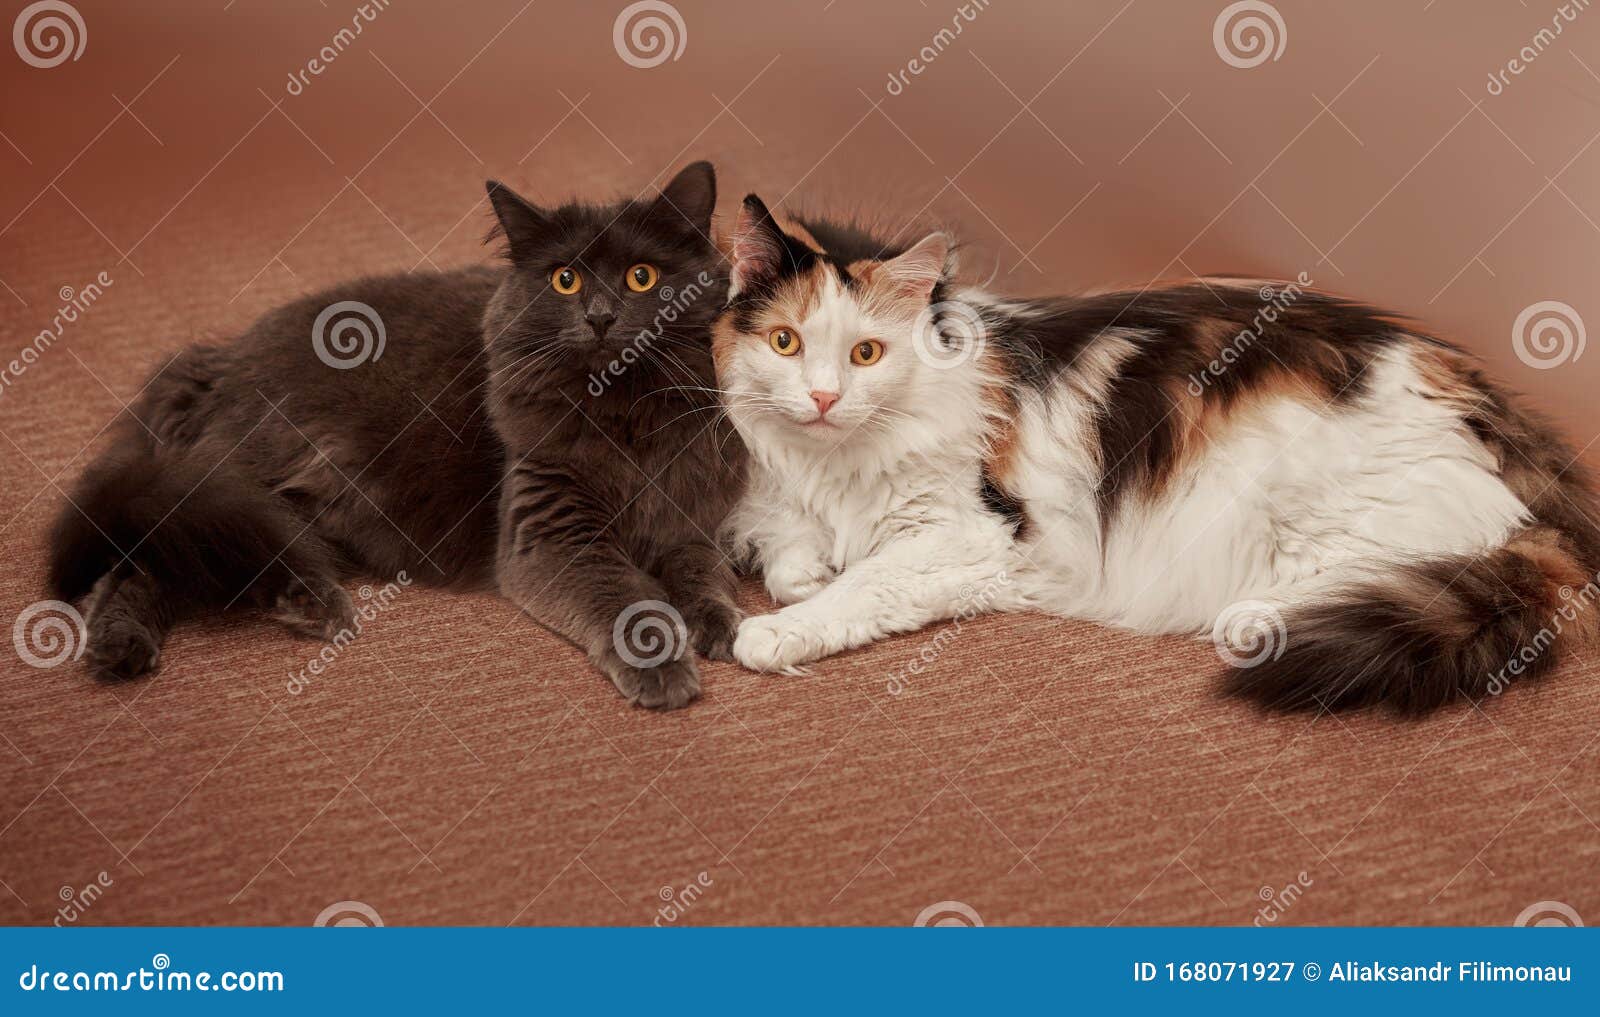 Best Friends Concept. Friends Together Fun Stock Image - Image of lazy ...